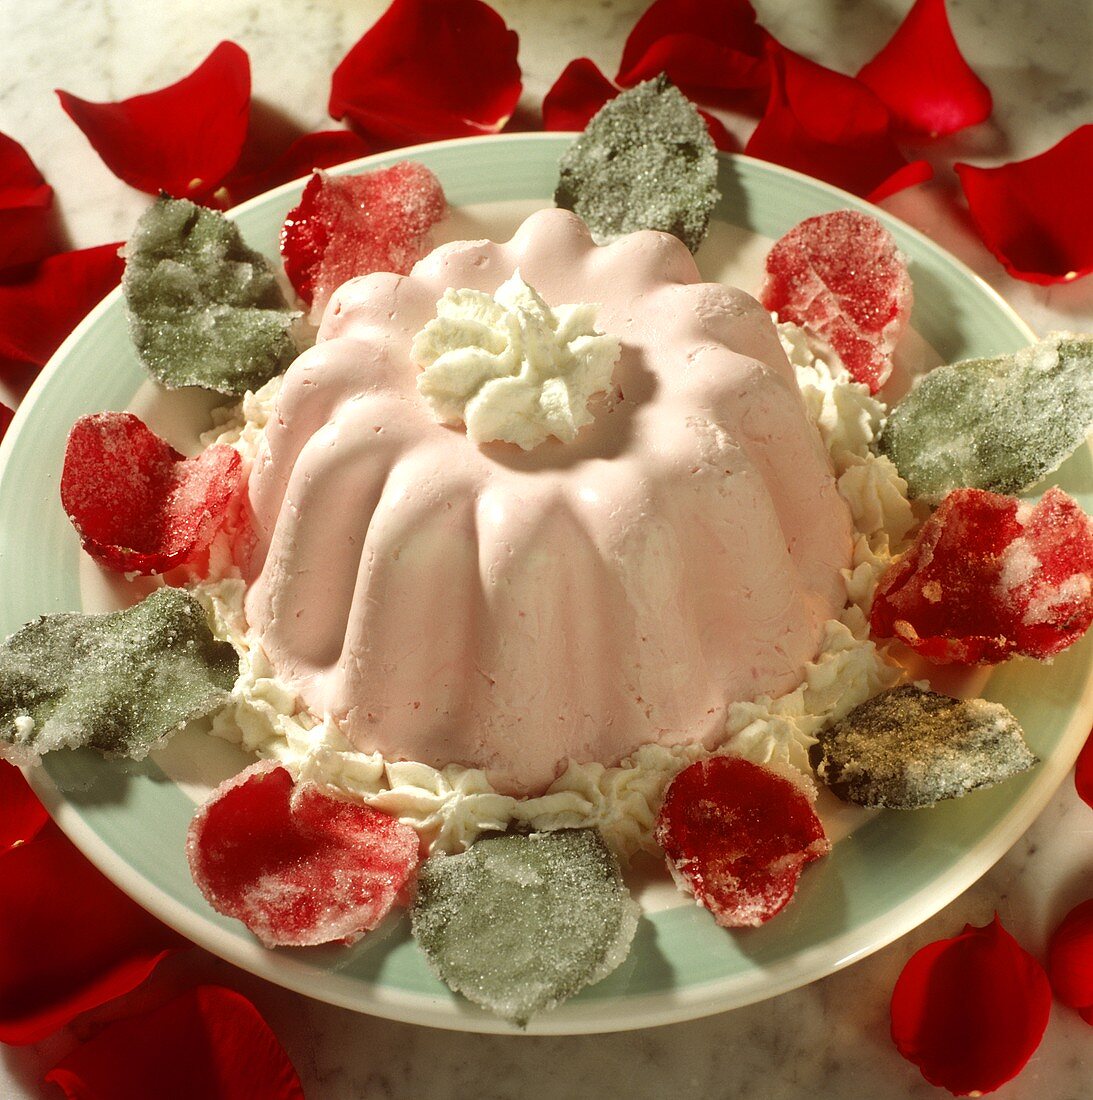 Romantic rose jelly with sugared rose petals